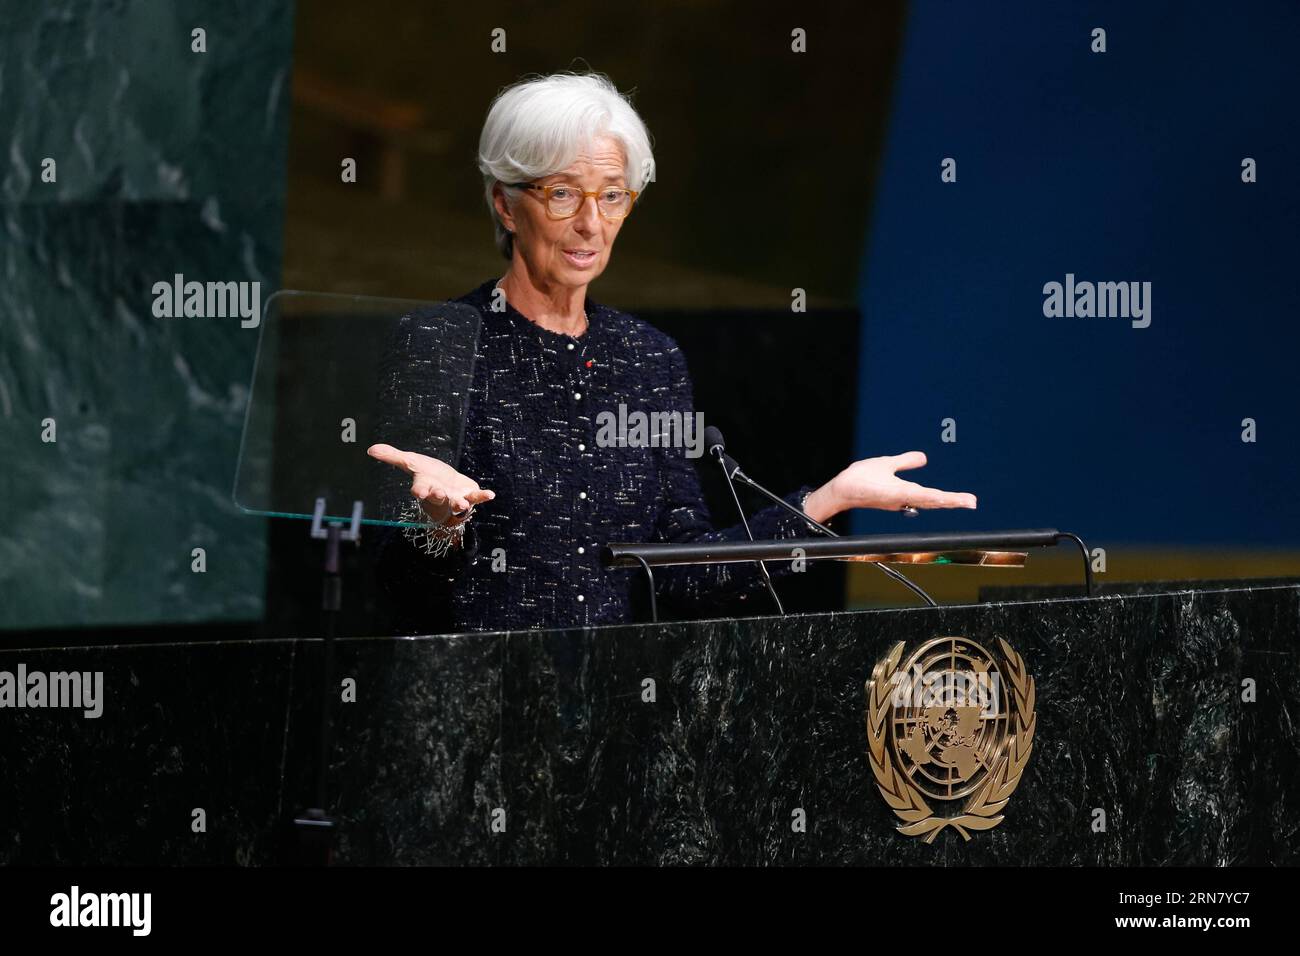 (150925) -- NEW YORK, Sept. 25, 2015 -- Managing Director of the International Monetary Fund (IMF) Christine Lagarde addresses the Sustainable Development Summit at United Nations headquarters in New York, Sept. 25, 2015. A momentous sustainable development agenda, which charts a new era of sustainable development until 2030, was adopted on Friday by 193 UN member states at the UN Sustainable Development Summit at the UN headquarters in New York. ) UN-NEW YORK-SUSTAINABLE DEVELOPMENT SUMMIT-AGENDA-ADOPTED LixMuzi PUBLICATIONxNOTxINxCHN   New York Sept 25 2015 Managing Director of The Internati Stock Photo